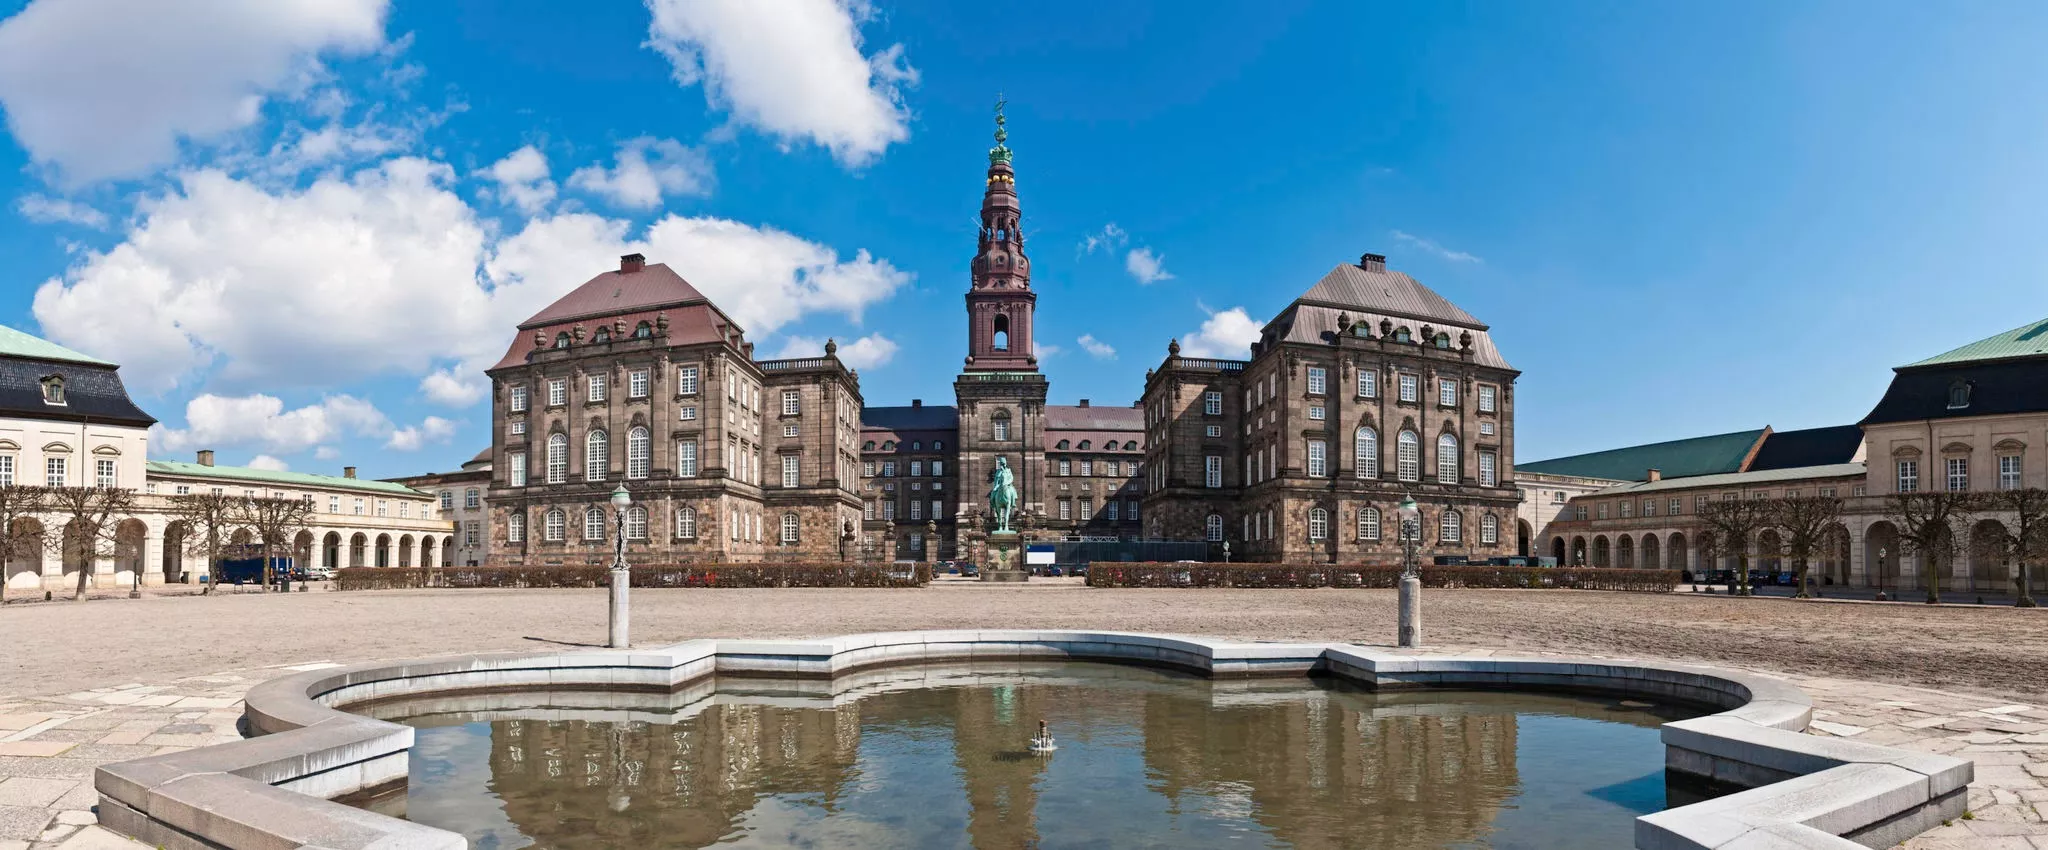 Christiansborg in Denmark, Europe | Architecture - Rated 3.9